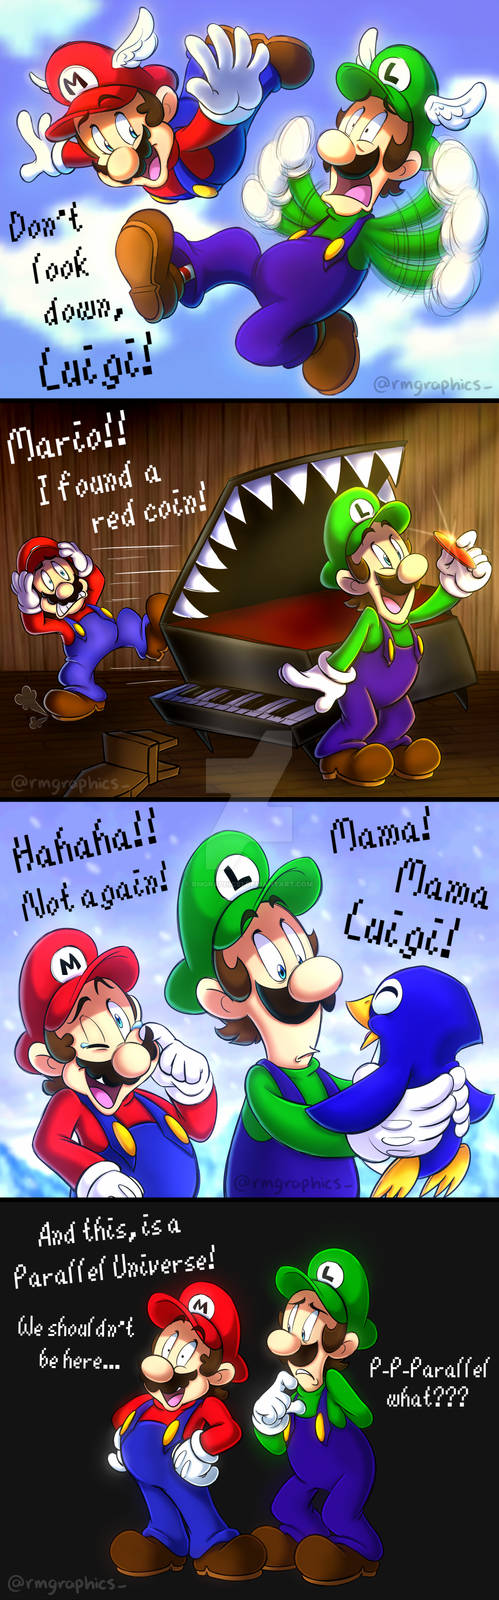 L is Real - Super Mario 64 Comic by rmgraphics1 on DeviantArt